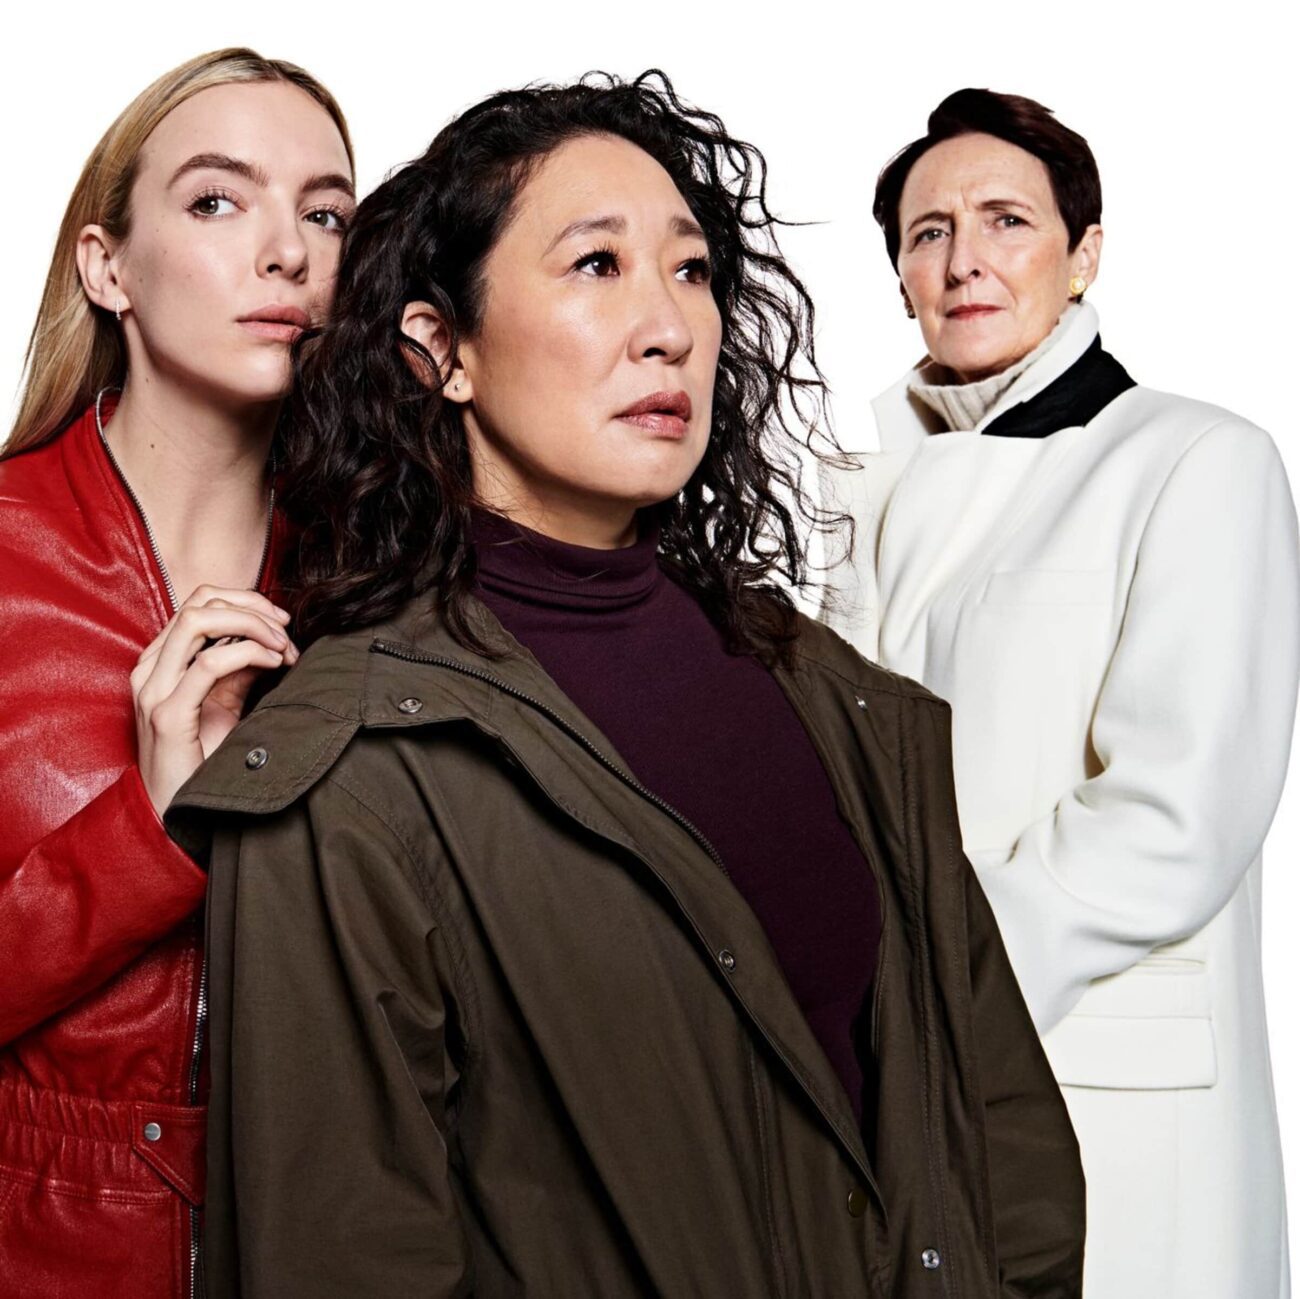 Get ready for another binge day. So, when can we expect to watch season 4 of 'Killing Eve' on the BBC America? Find out what we know so far!